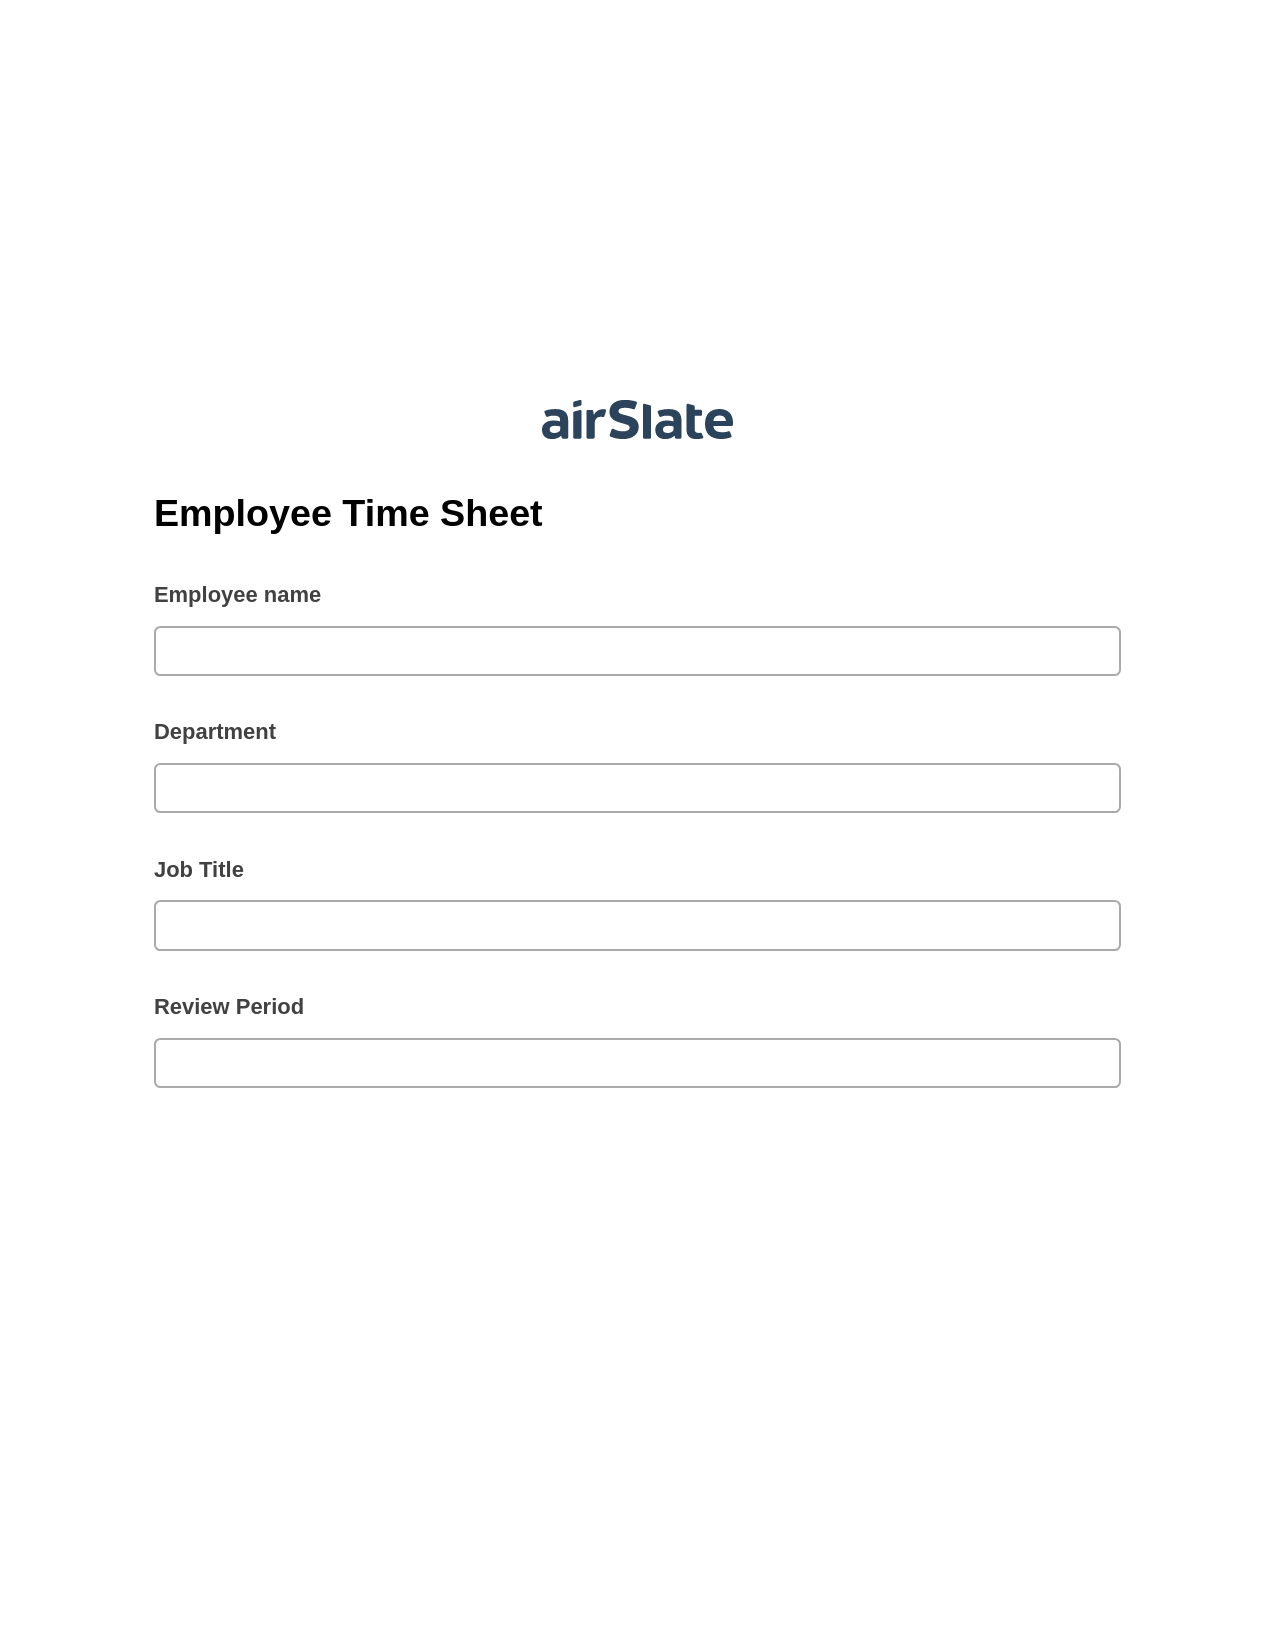 Employee Time Sheet Pre-fill from CSV File Bot, Send a Slate with Roles Bot, Export to NetSuite Bot